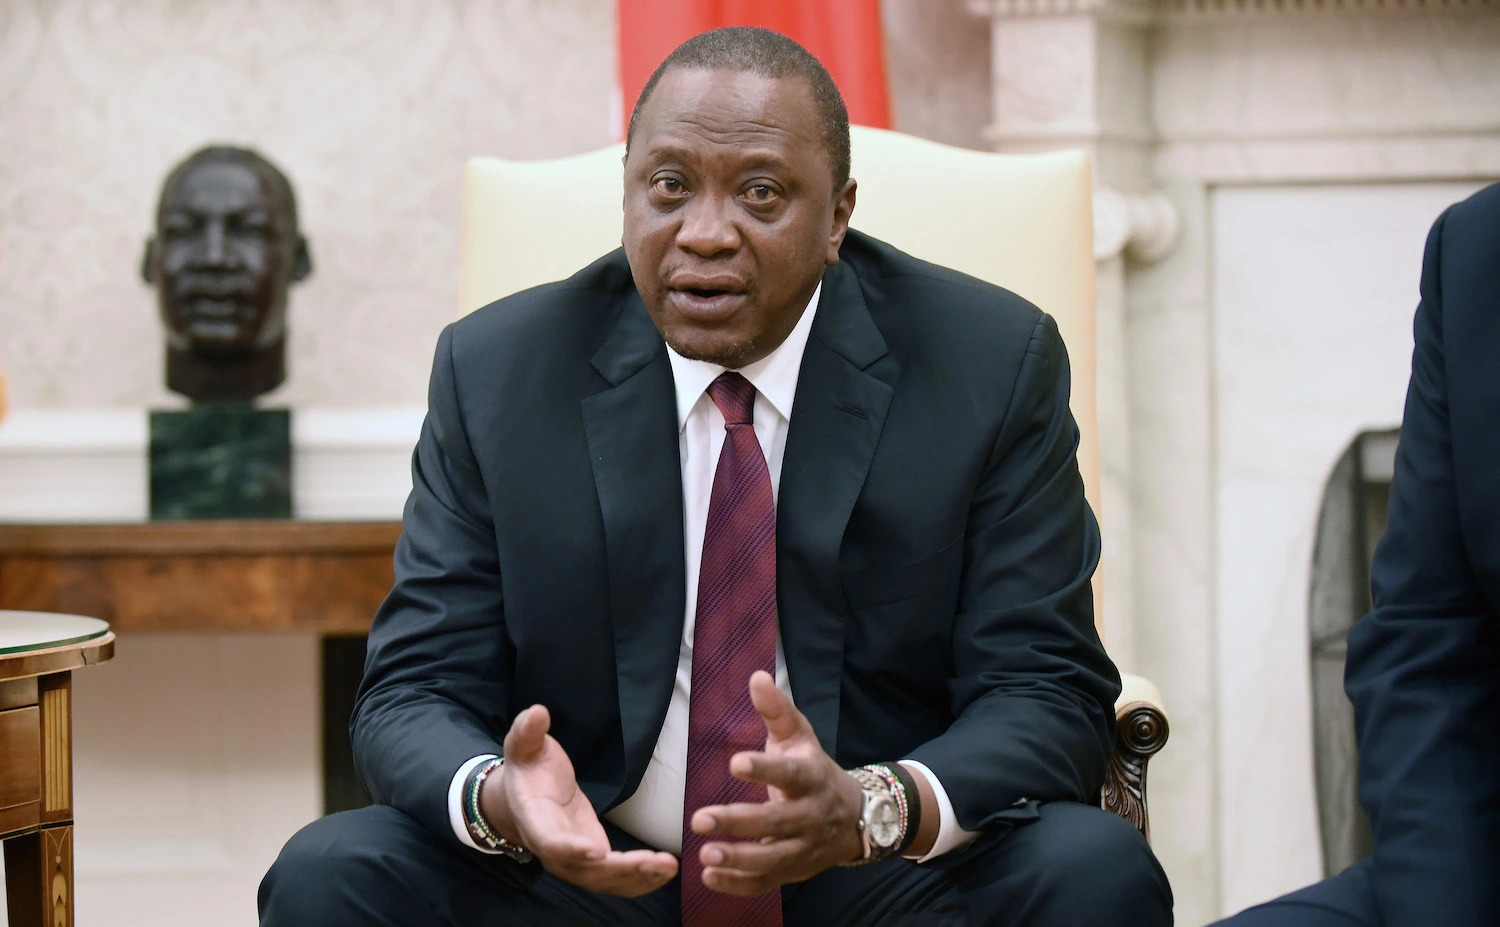 Kenya's Supreme Court reject President Uhuru Kenyatta's bid to change the constitution, saying a sitting president is not legally permitted to do so.